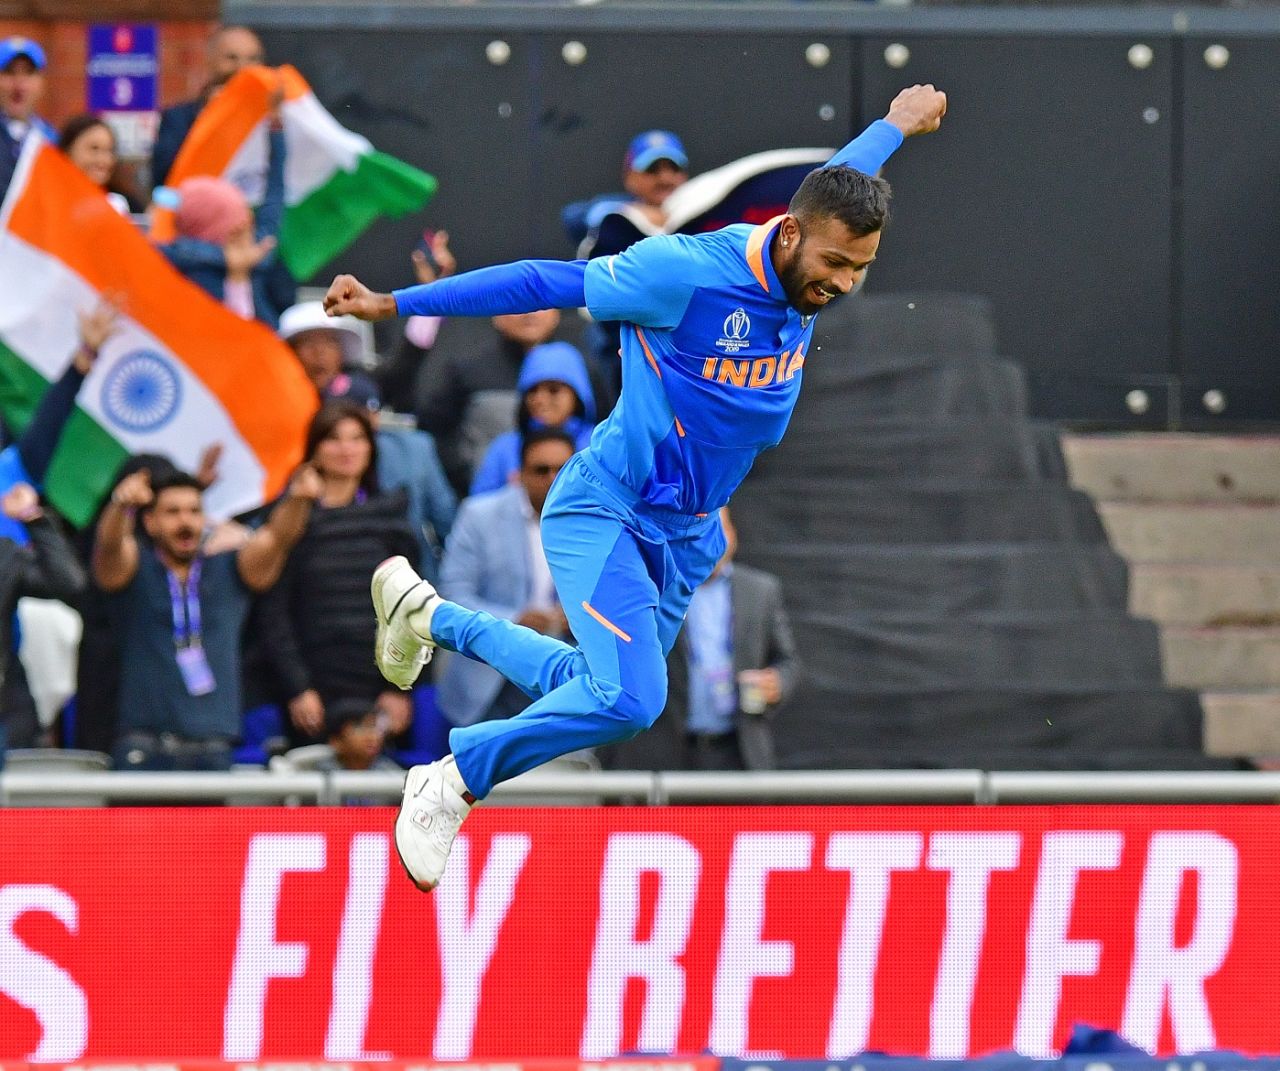 Hardik Pandya is cock-a-hoop after picking up two wickets in two balls, India v Pakistan, World Cup 2019, Manchester, June 16, 2019